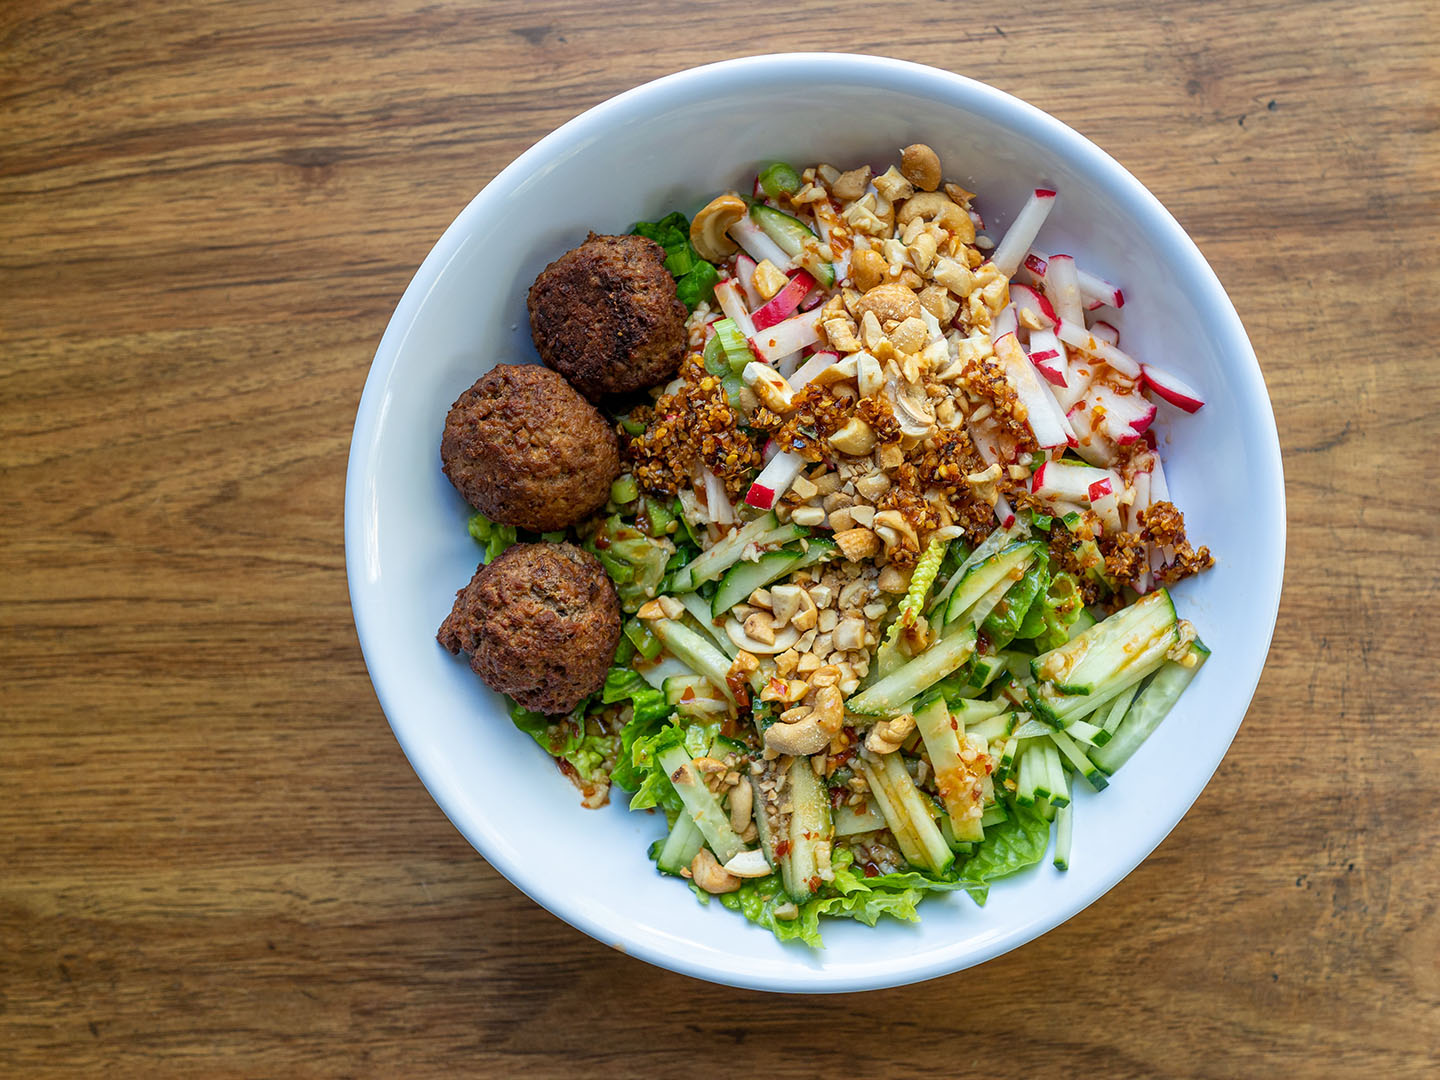 Plant-based Vietnamese salad with Impossible meatballs